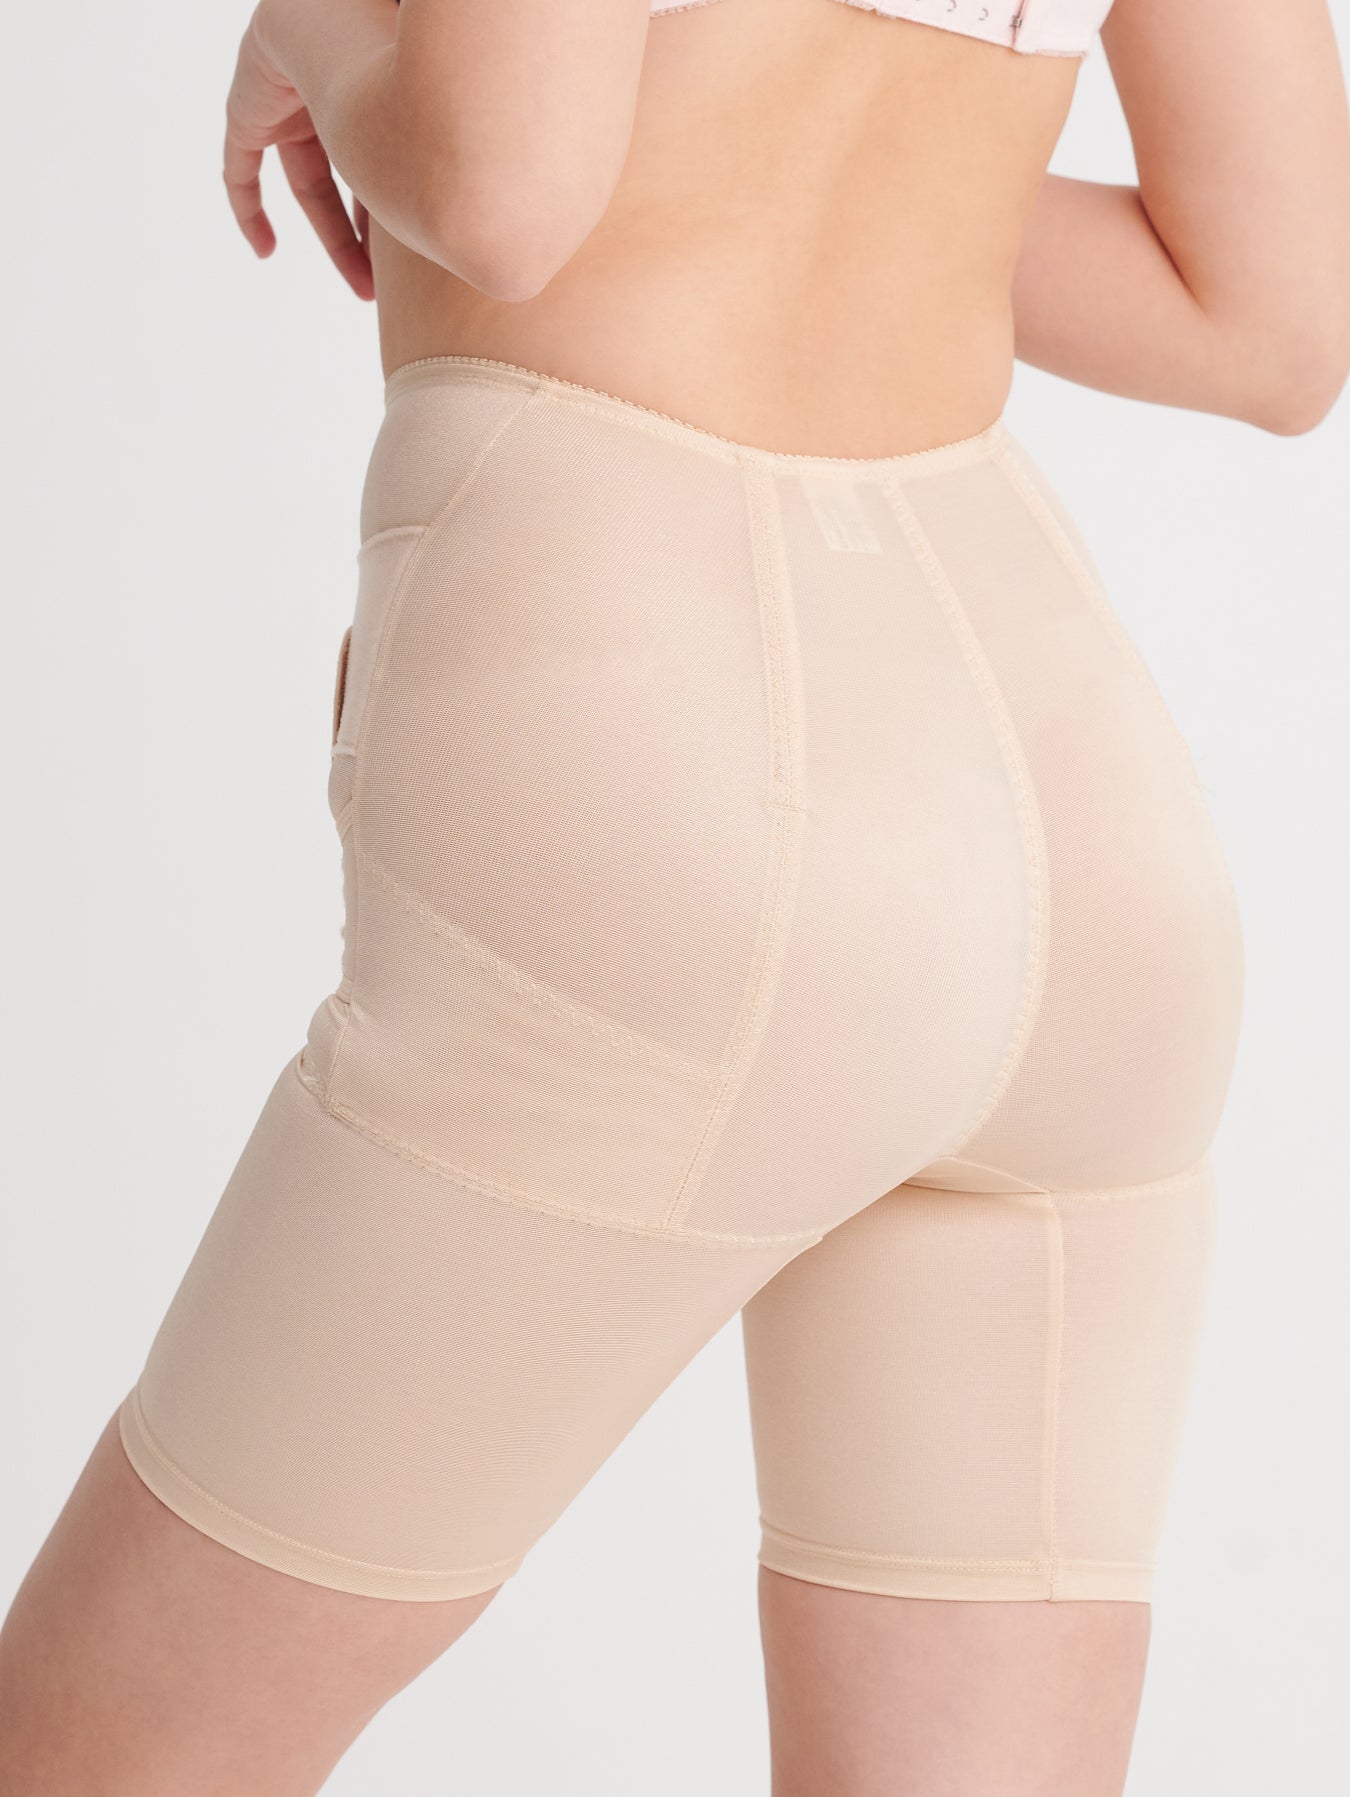 Postpartum Body Shaping Support Pants Step 3 – Inujirushi